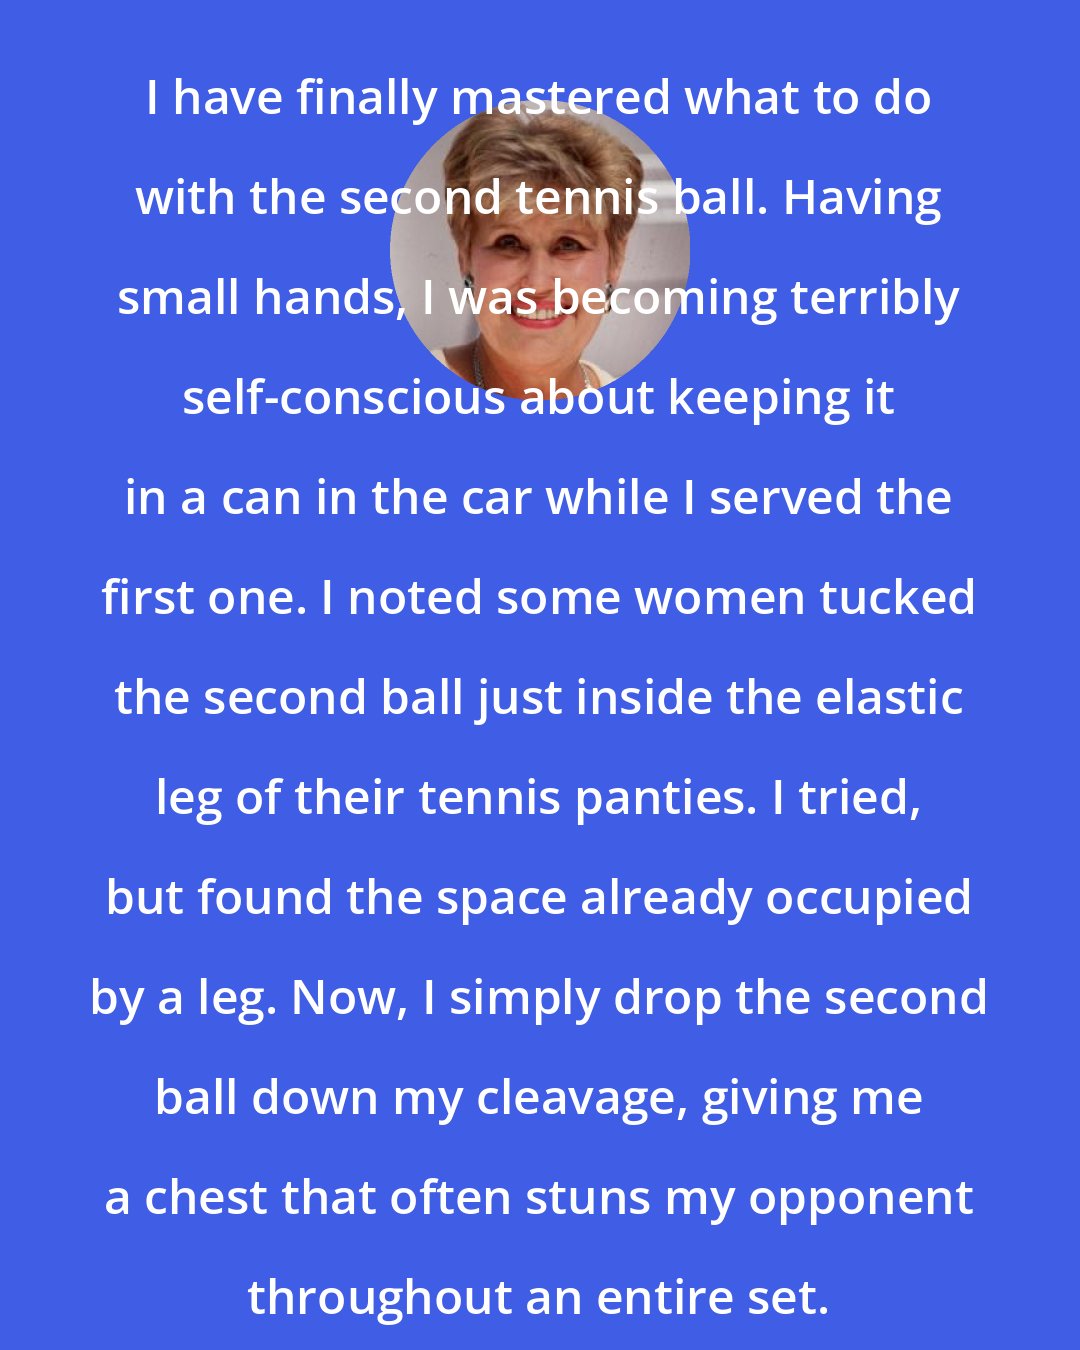 Erma Bombeck: I have finally mastered what to do with the second tennis ball. Having small hands, I was becoming terribly self-conscious about keeping it in a can in the car while I served the first one. I noted some women tucked the second ball just inside the elastic leg of their tennis panties. I tried, but found the space already occupied by a leg. Now, I simply drop the second ball down my cleavage, giving me a chest that often stuns my opponent throughout an entire set.